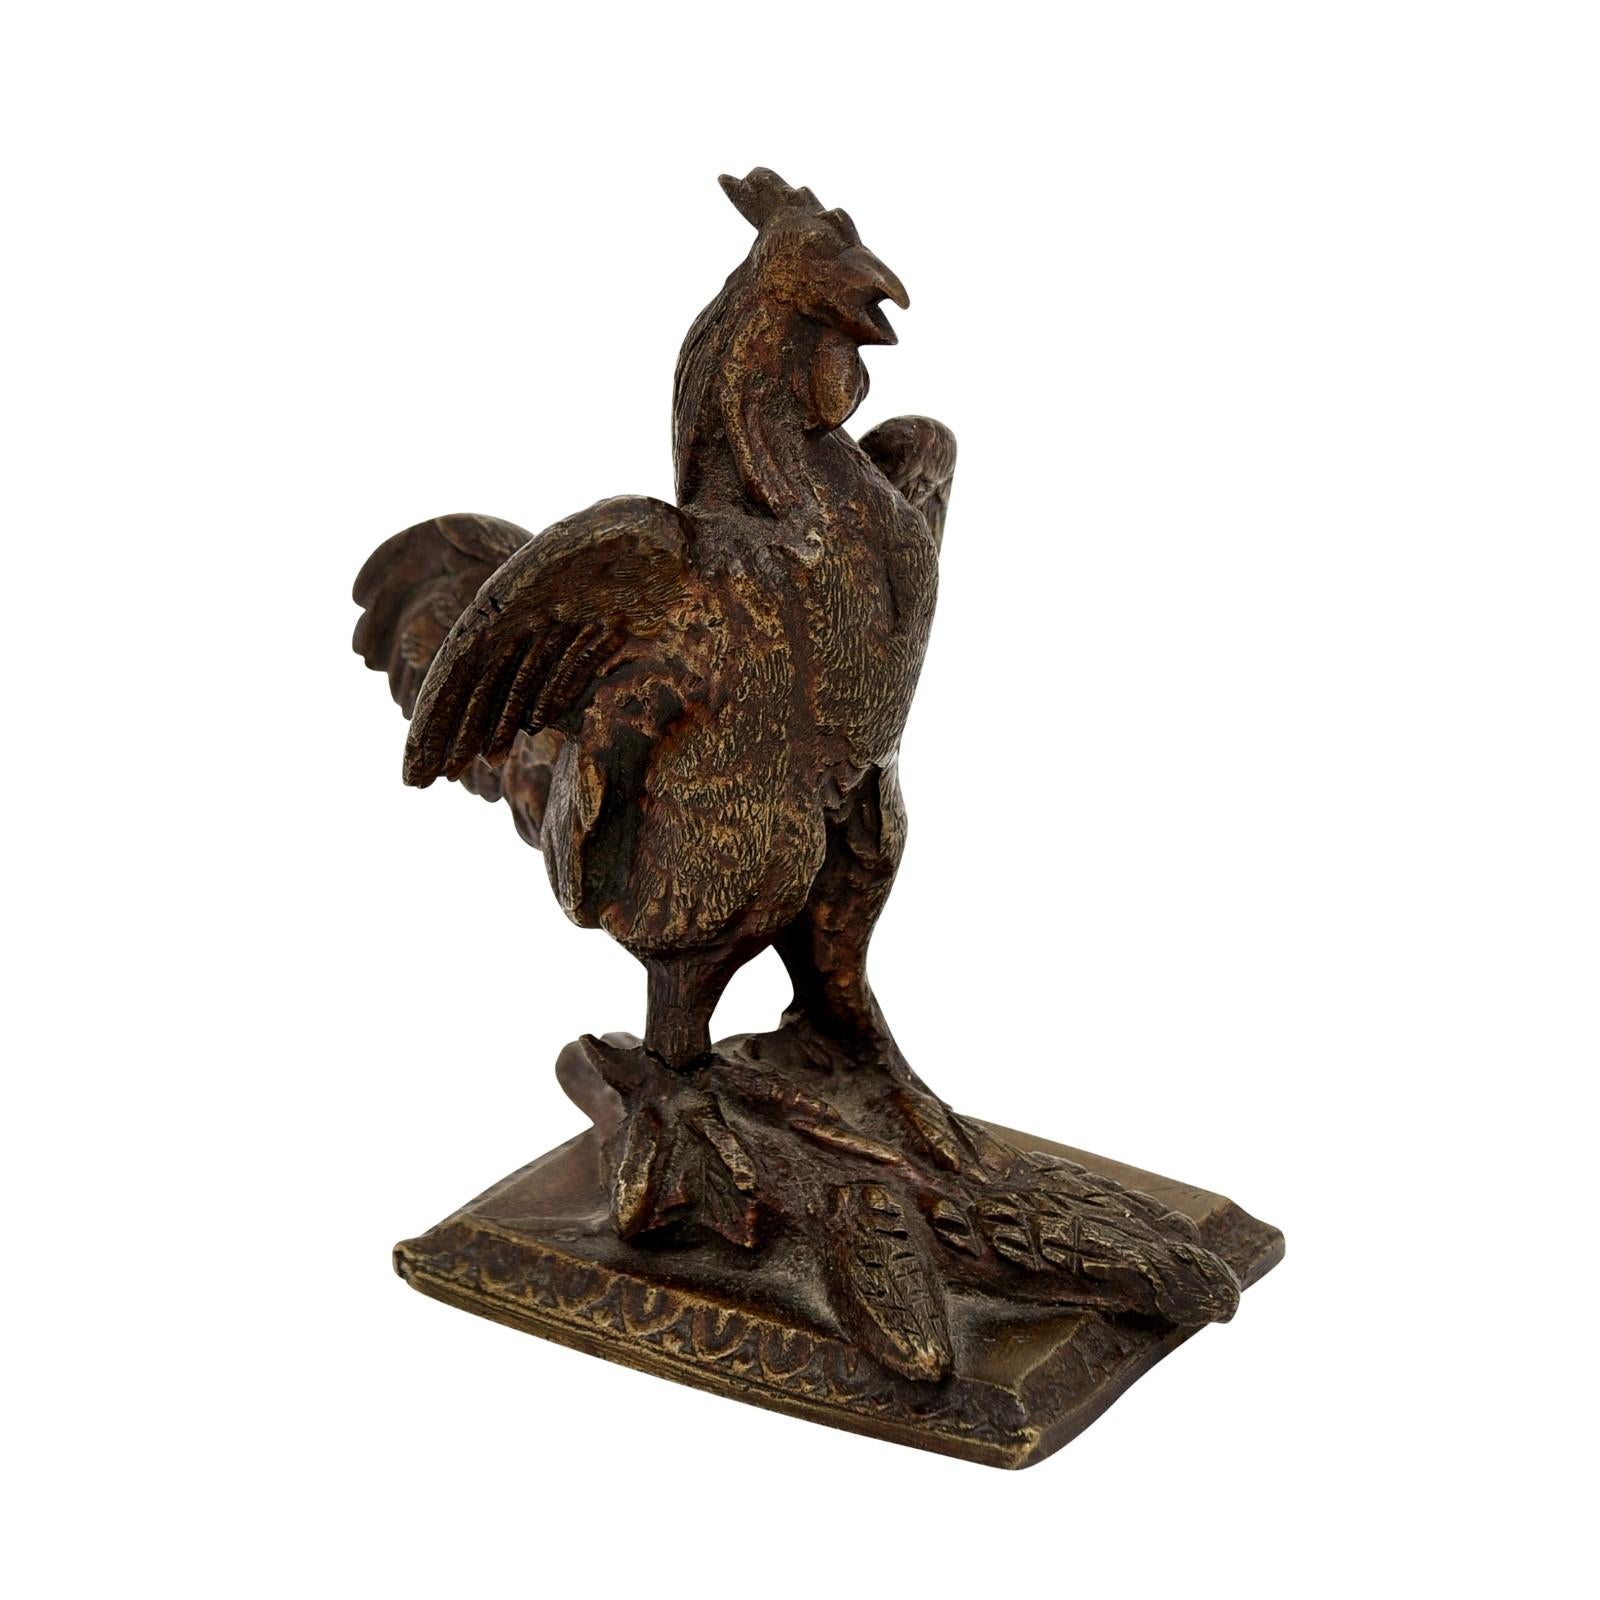 A French bronze sculpture from the 19th century depicting a rooster standing on a textured ground, his wings extended. Created during the 19th century, this bronze sculpture depicts the French national emblem, the rooster. The proud animal is